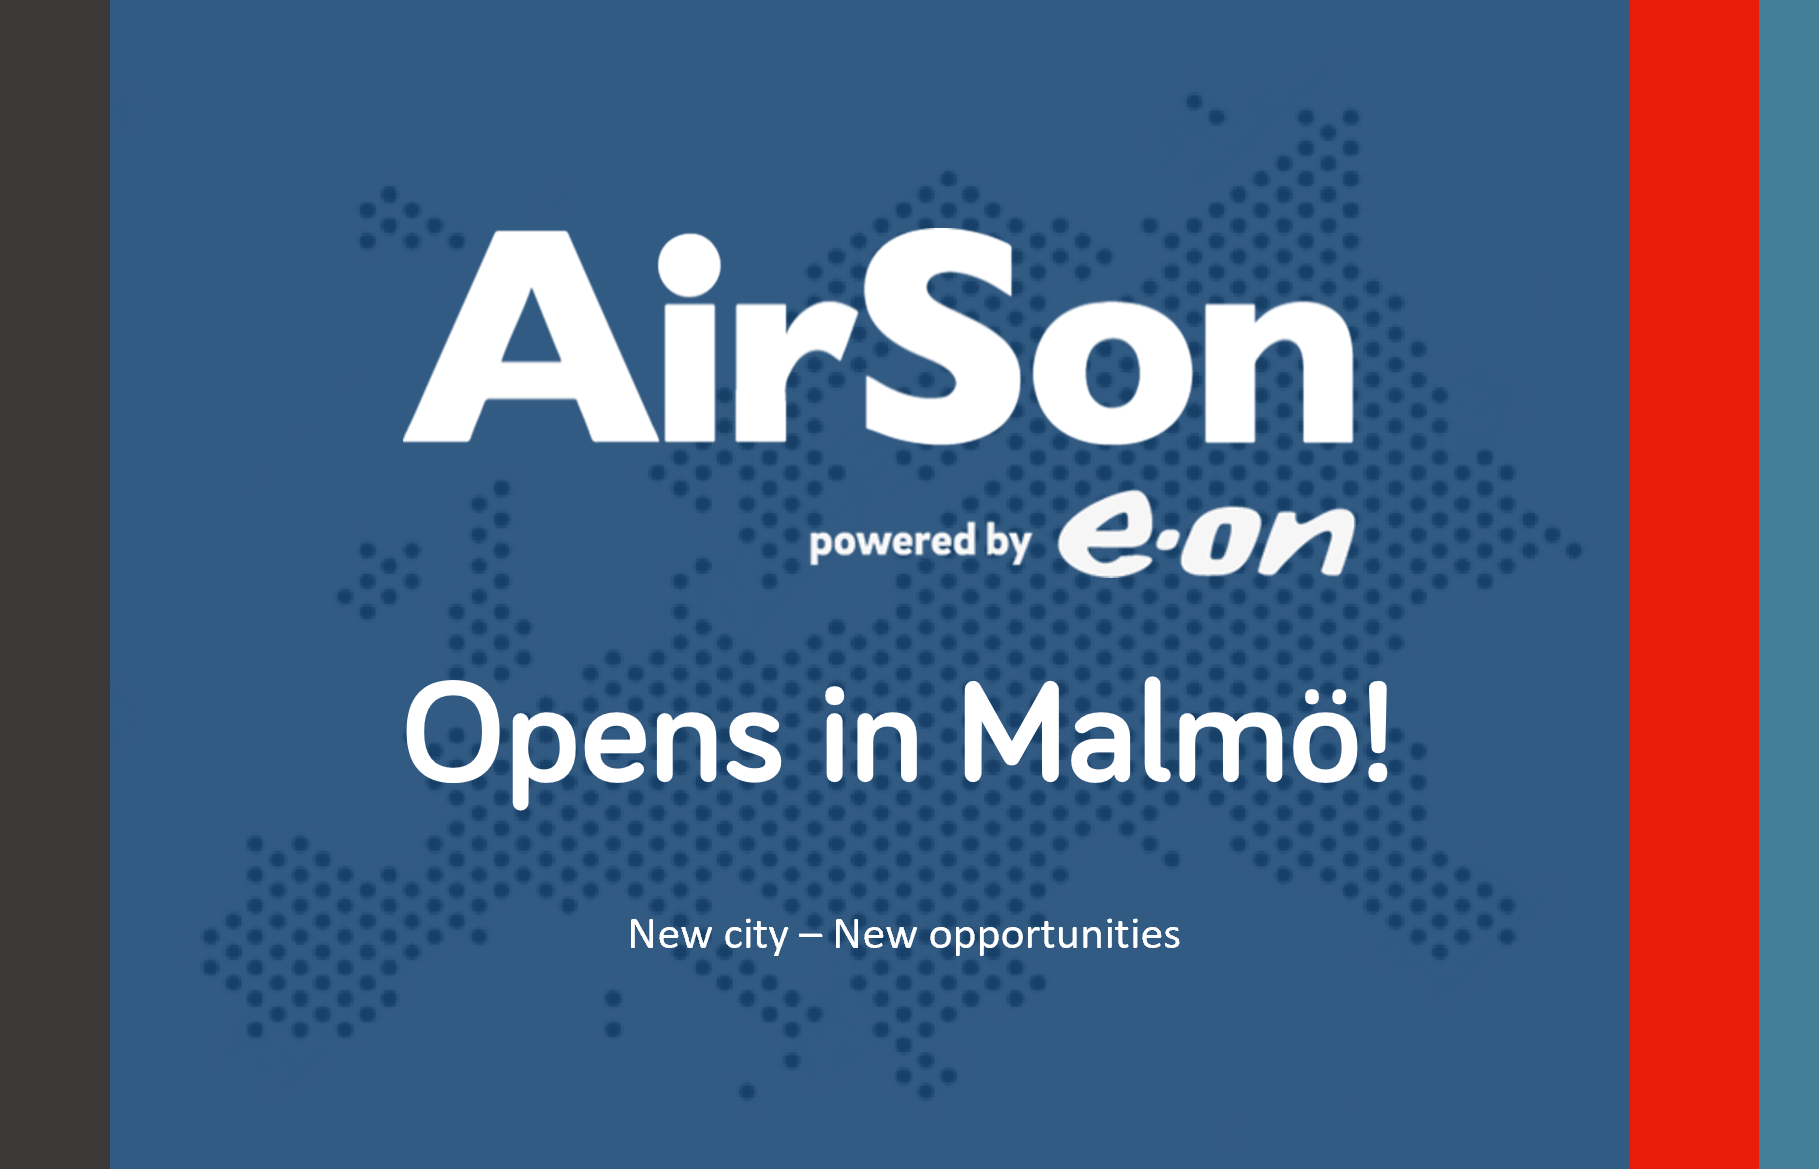 Airson opens in Malmö